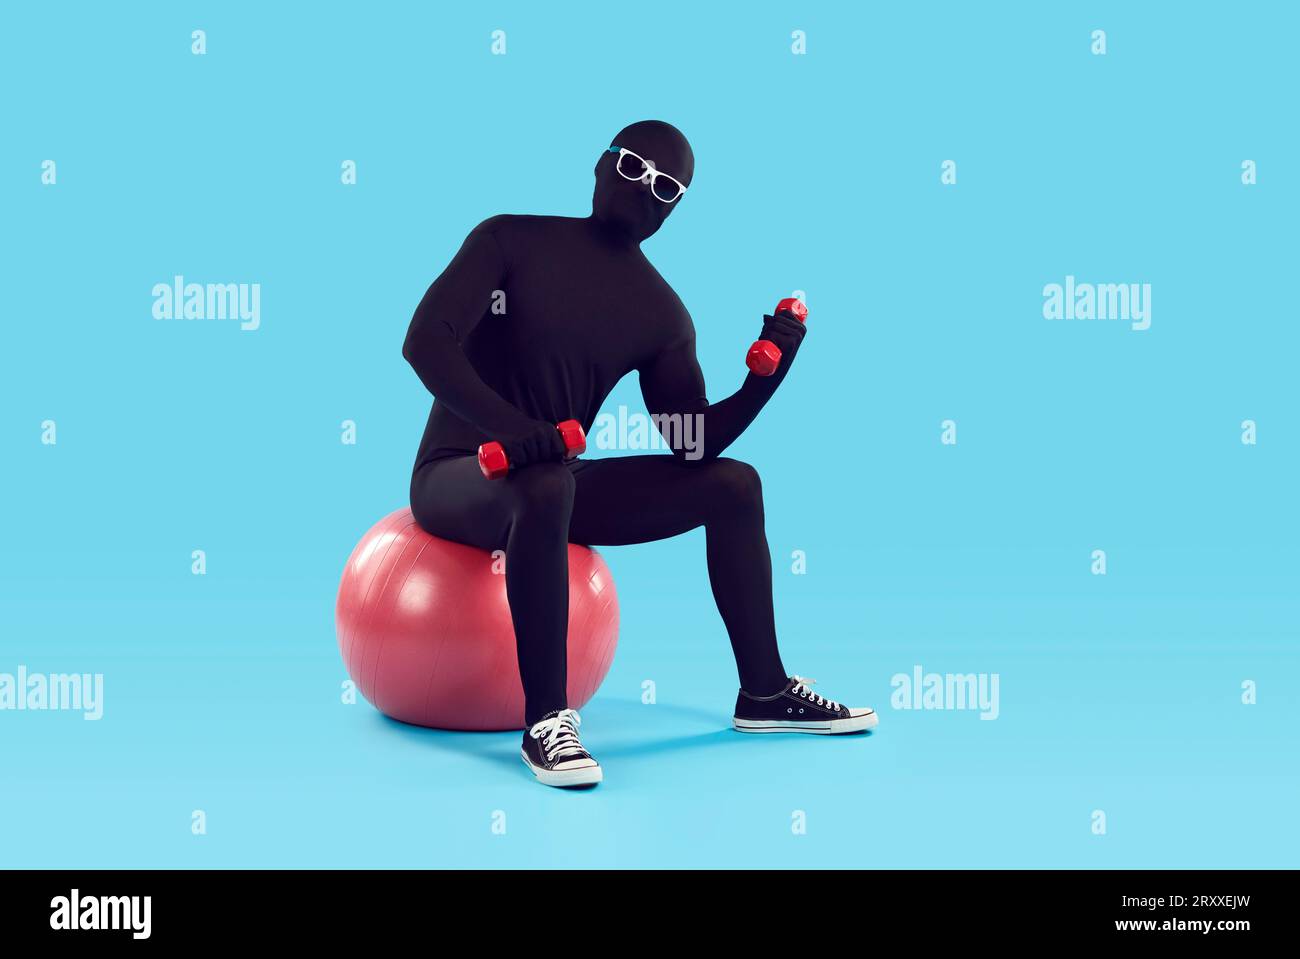 Man disguised in black spandex bodysuit sitting on fit ball and doing exercise with dumbbells Stock Photo